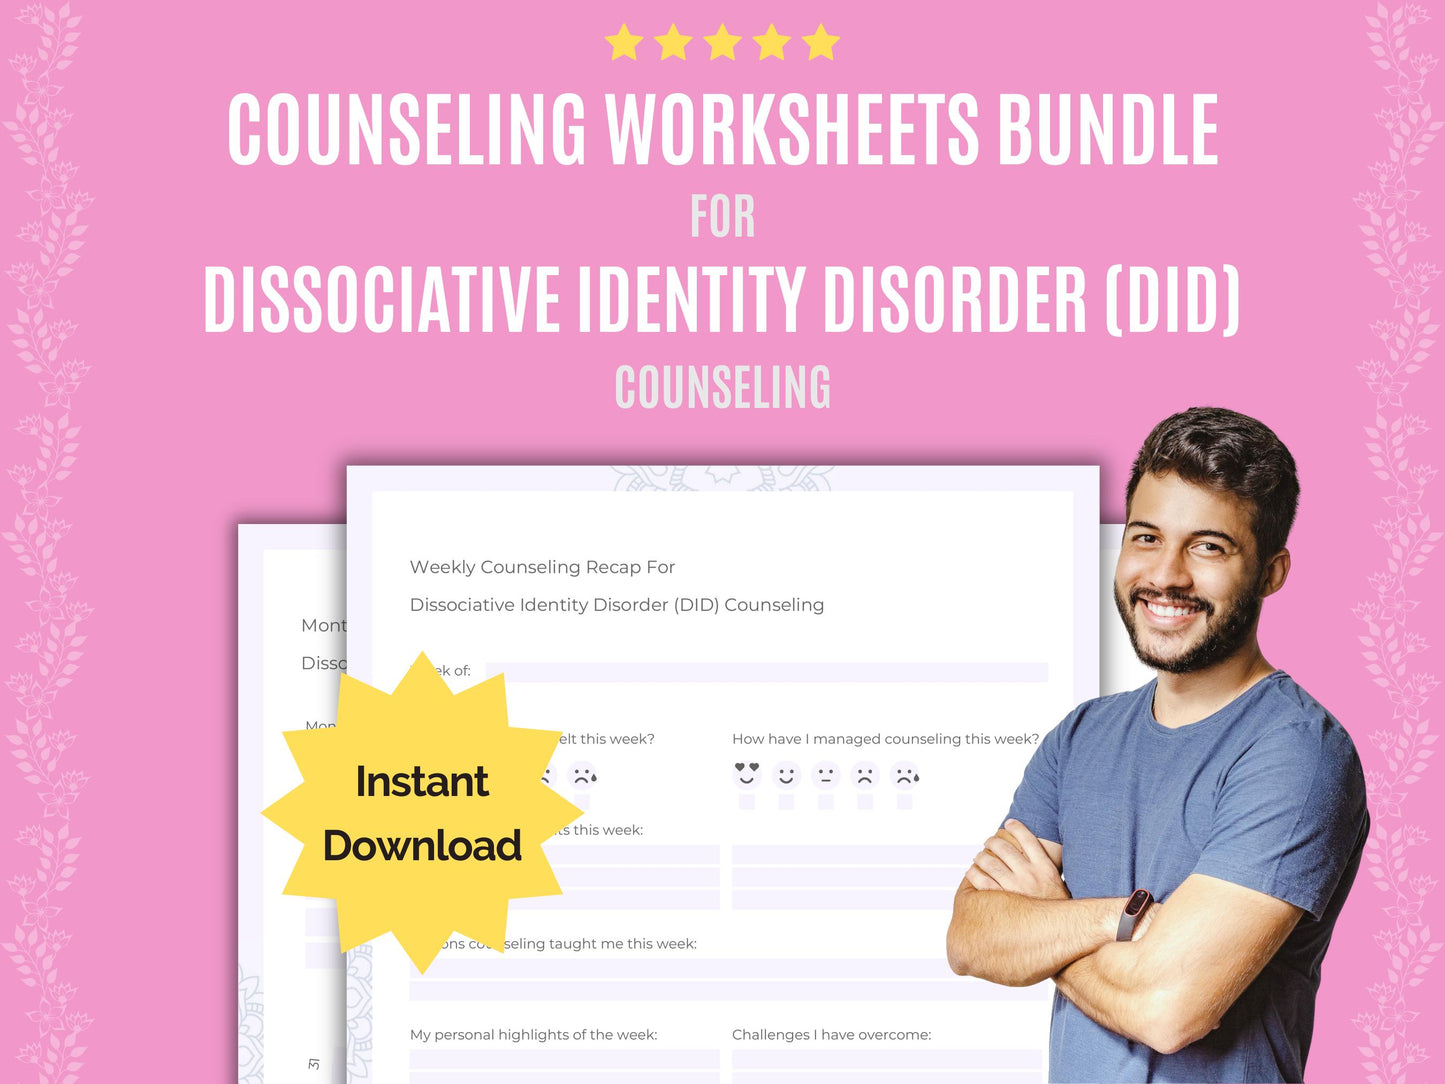 Dissociative Identity Disorder (DID) Counseling Cards